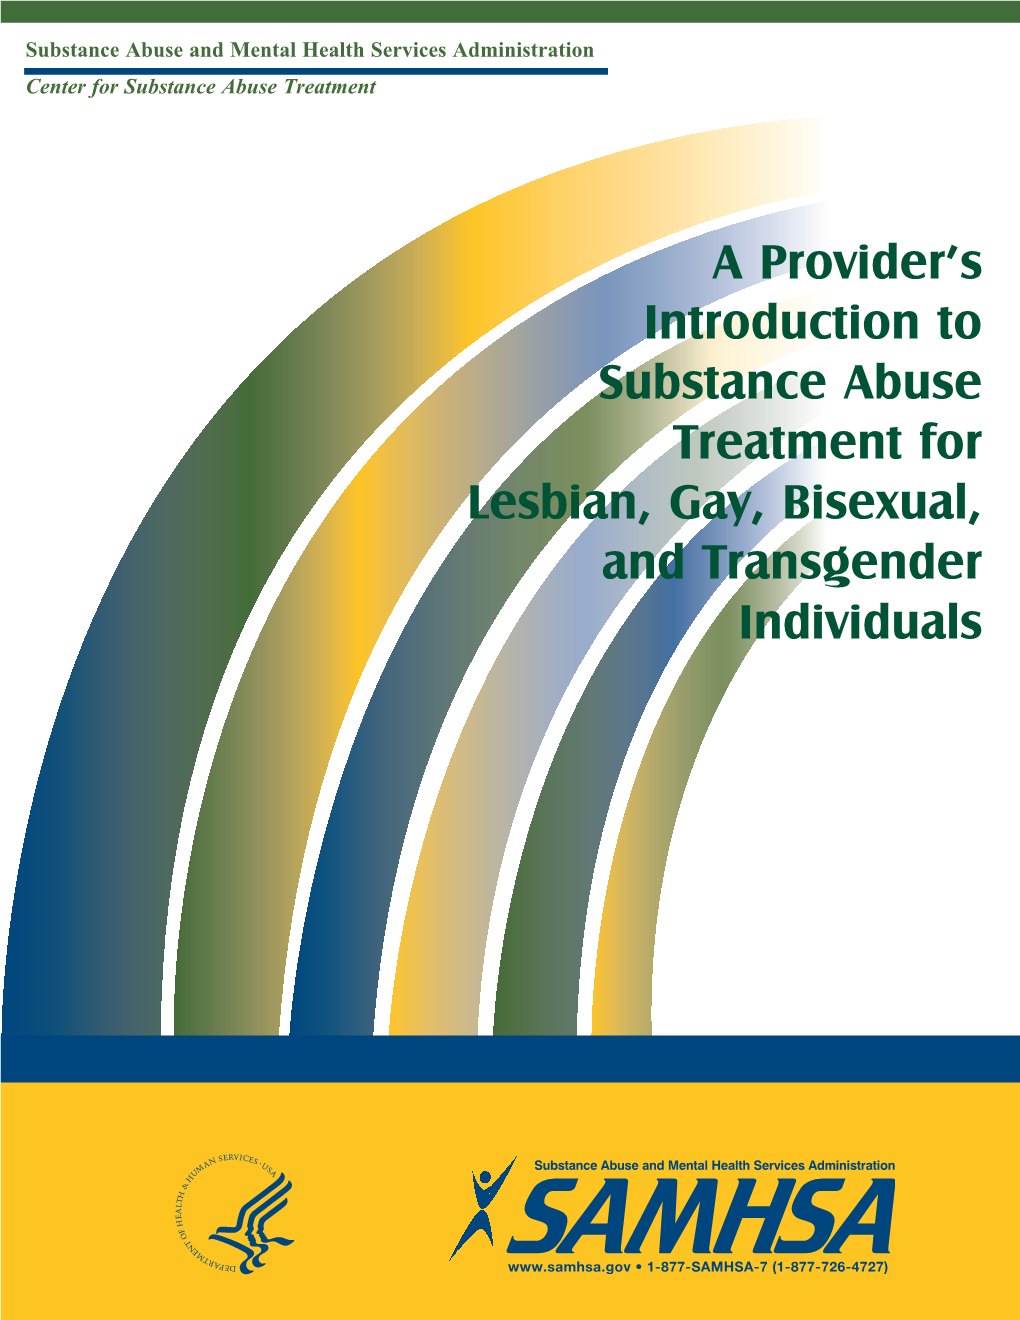 A Provider's Introduction to Substance Abuse Treatment for Lesbian, Gay, Bisexual, and Transgender Individuals